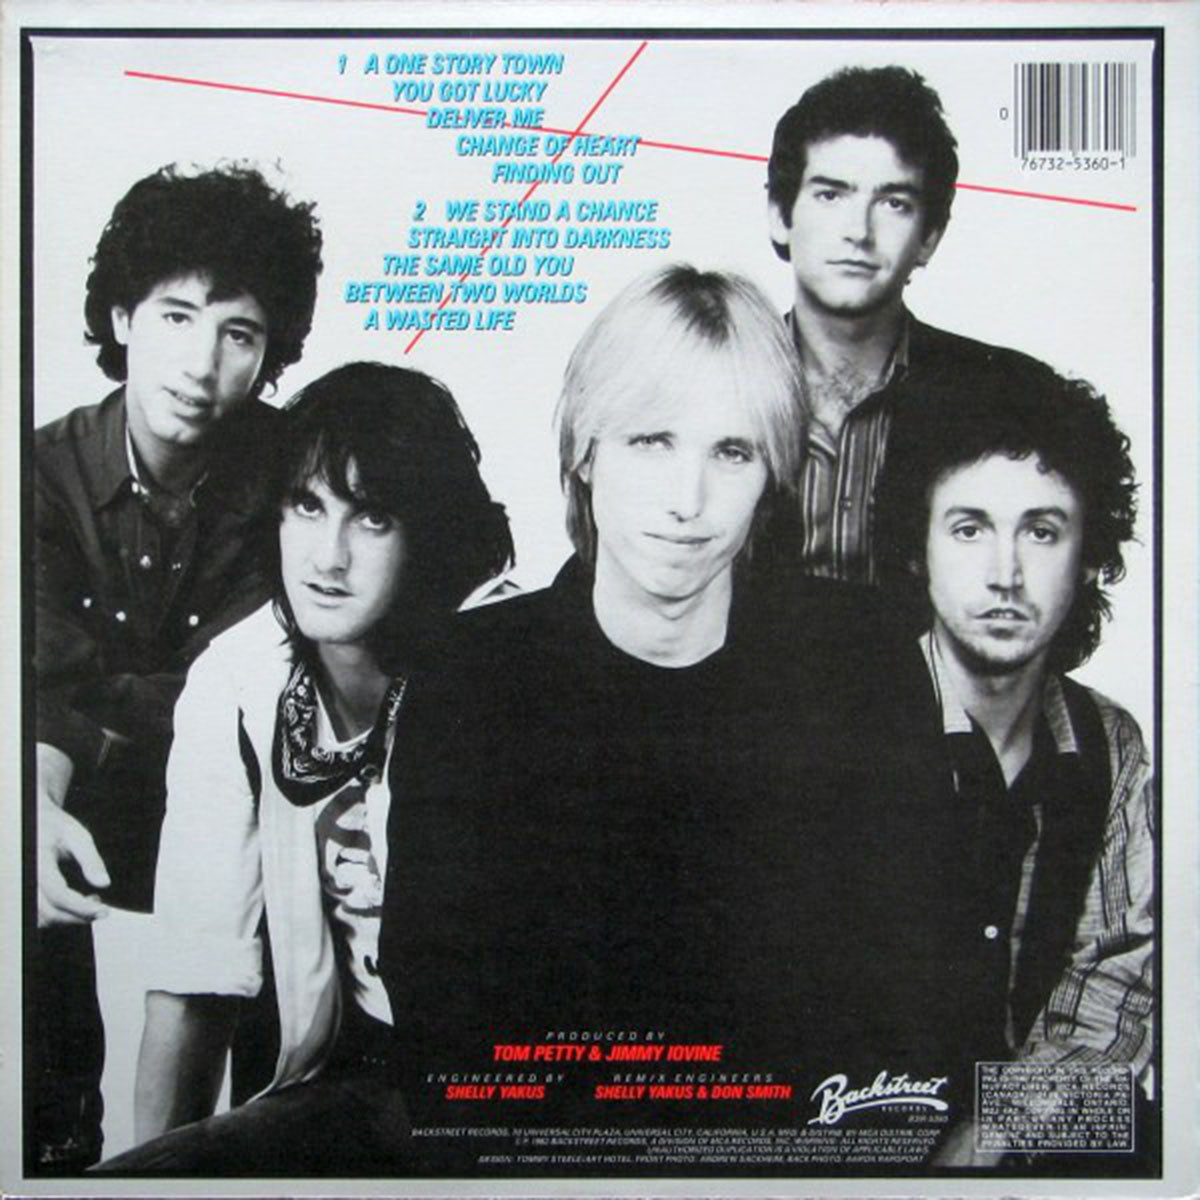 Tom Petty and The Heartbreakers ‎– Long After Dark - 1982